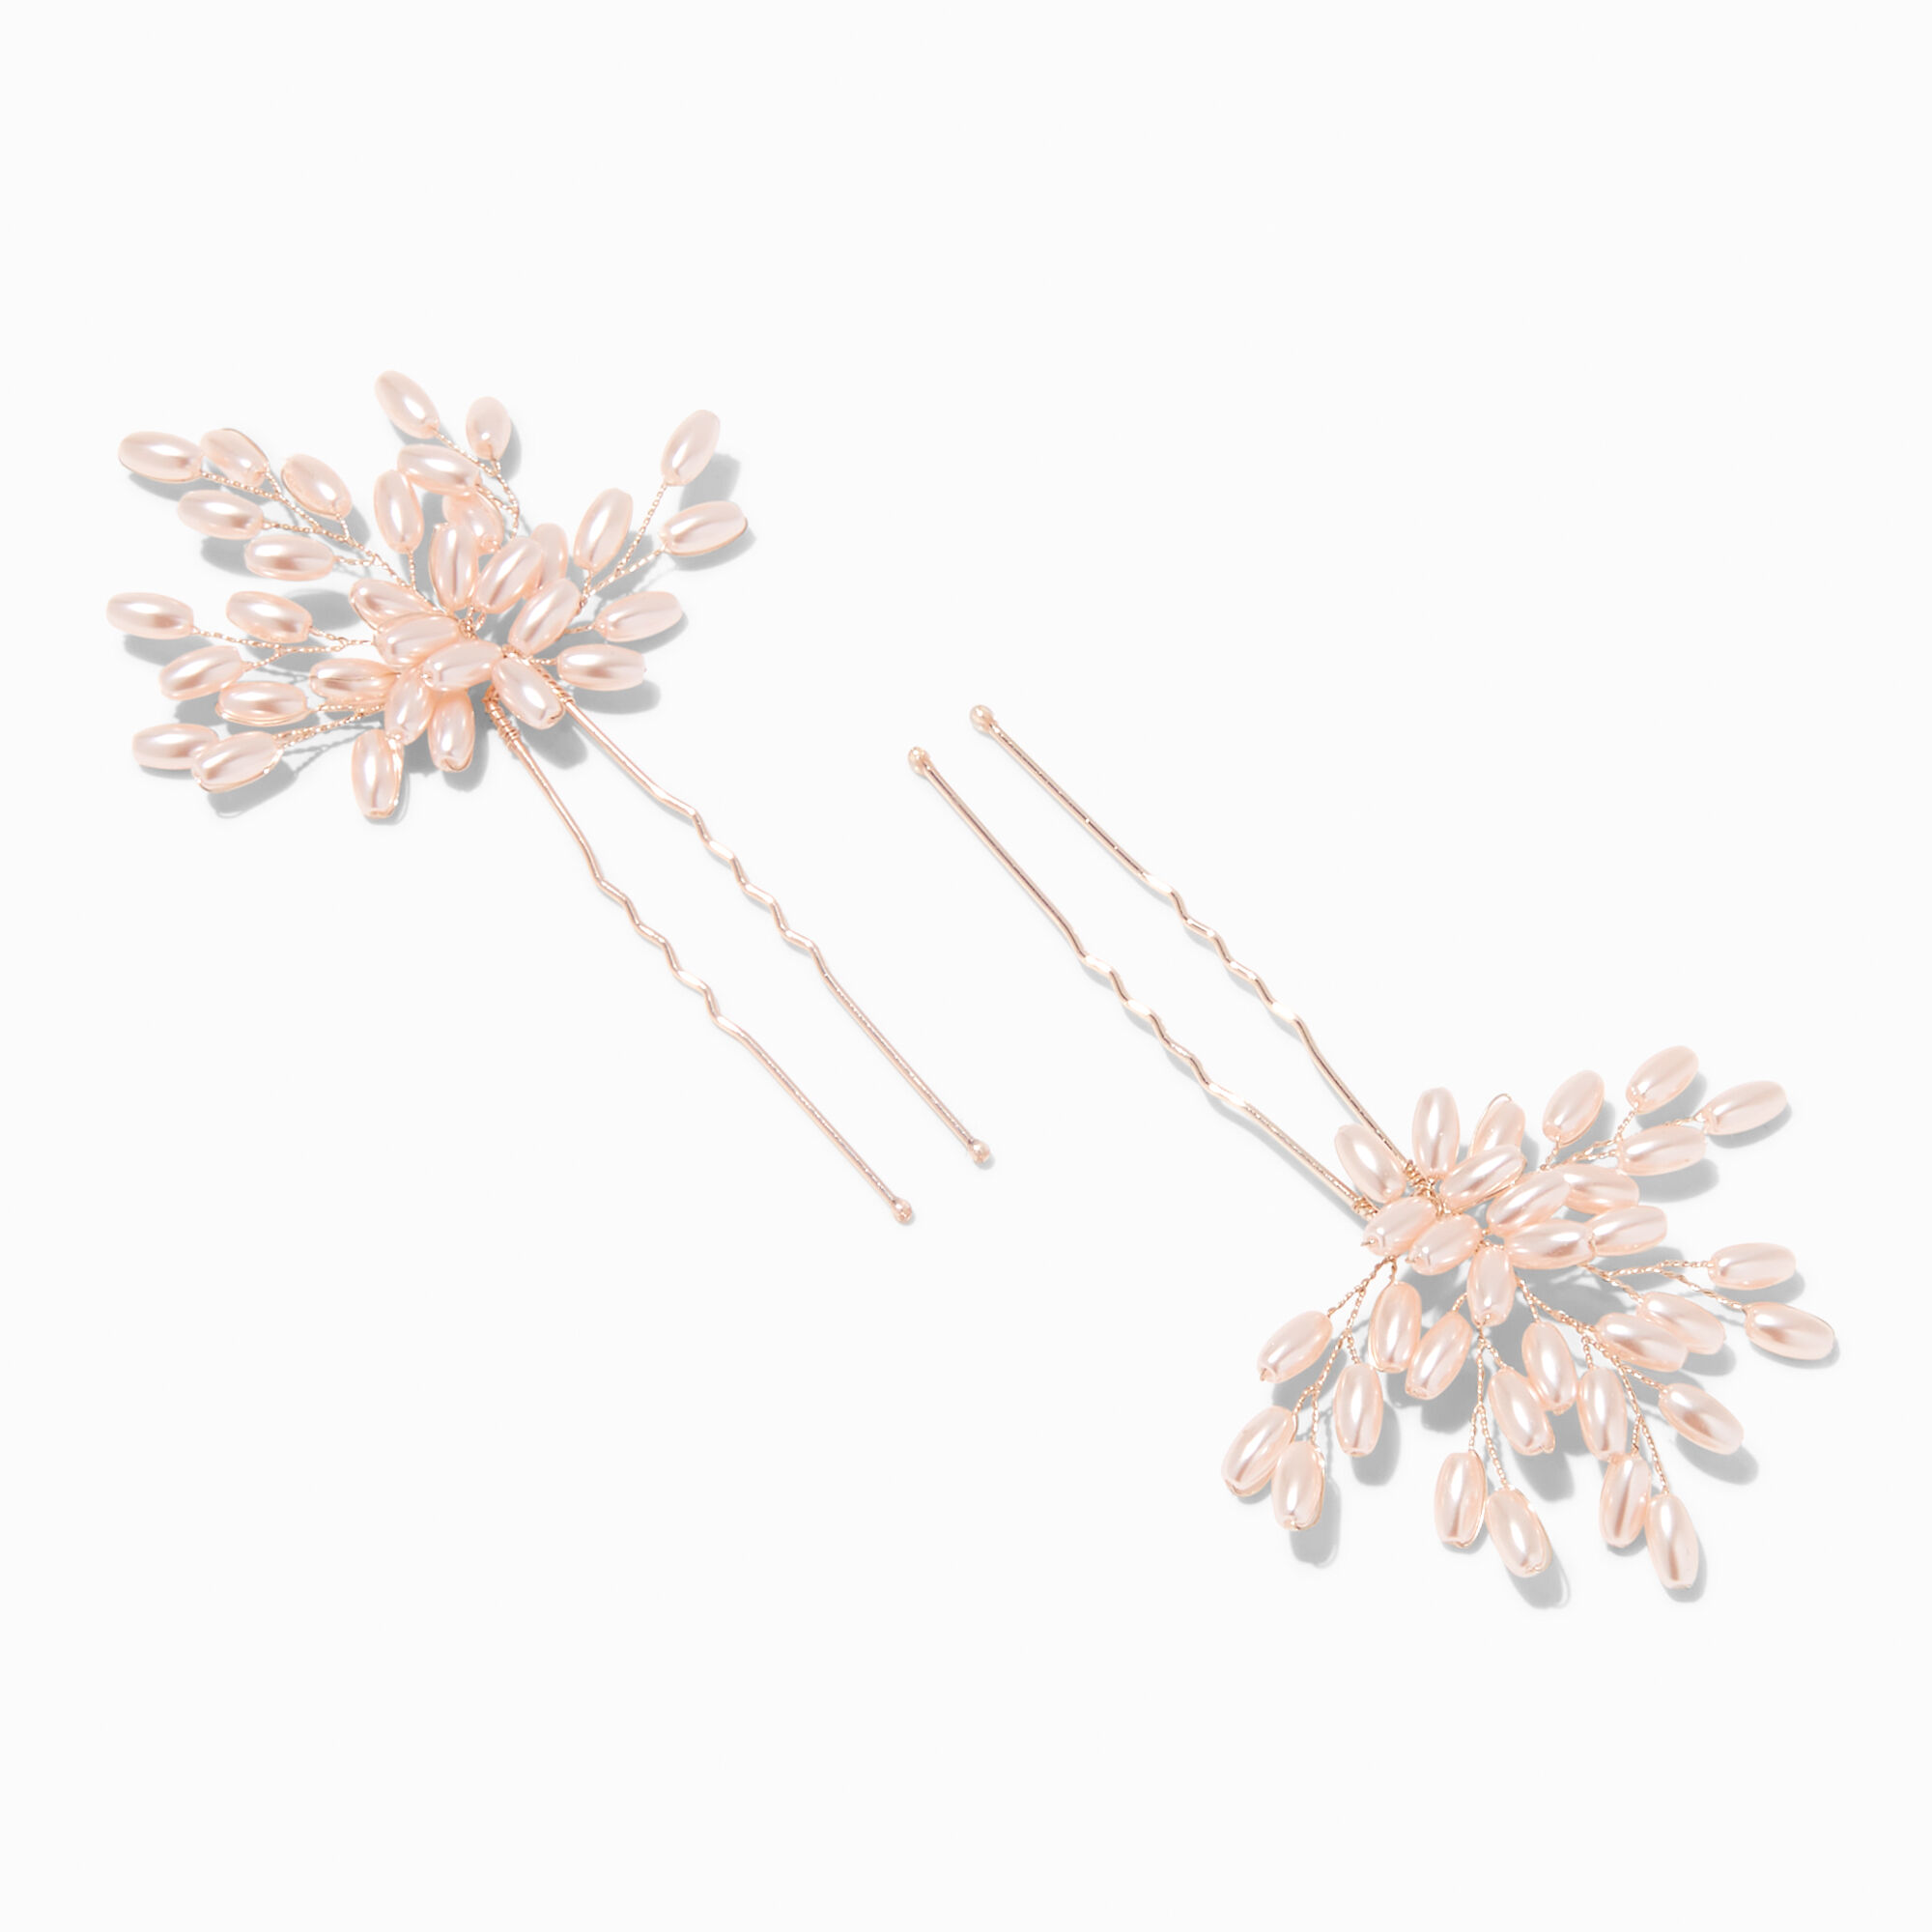 View Claires Blush Pearl Floral Spray Hair Pins 2 Pack Pink information